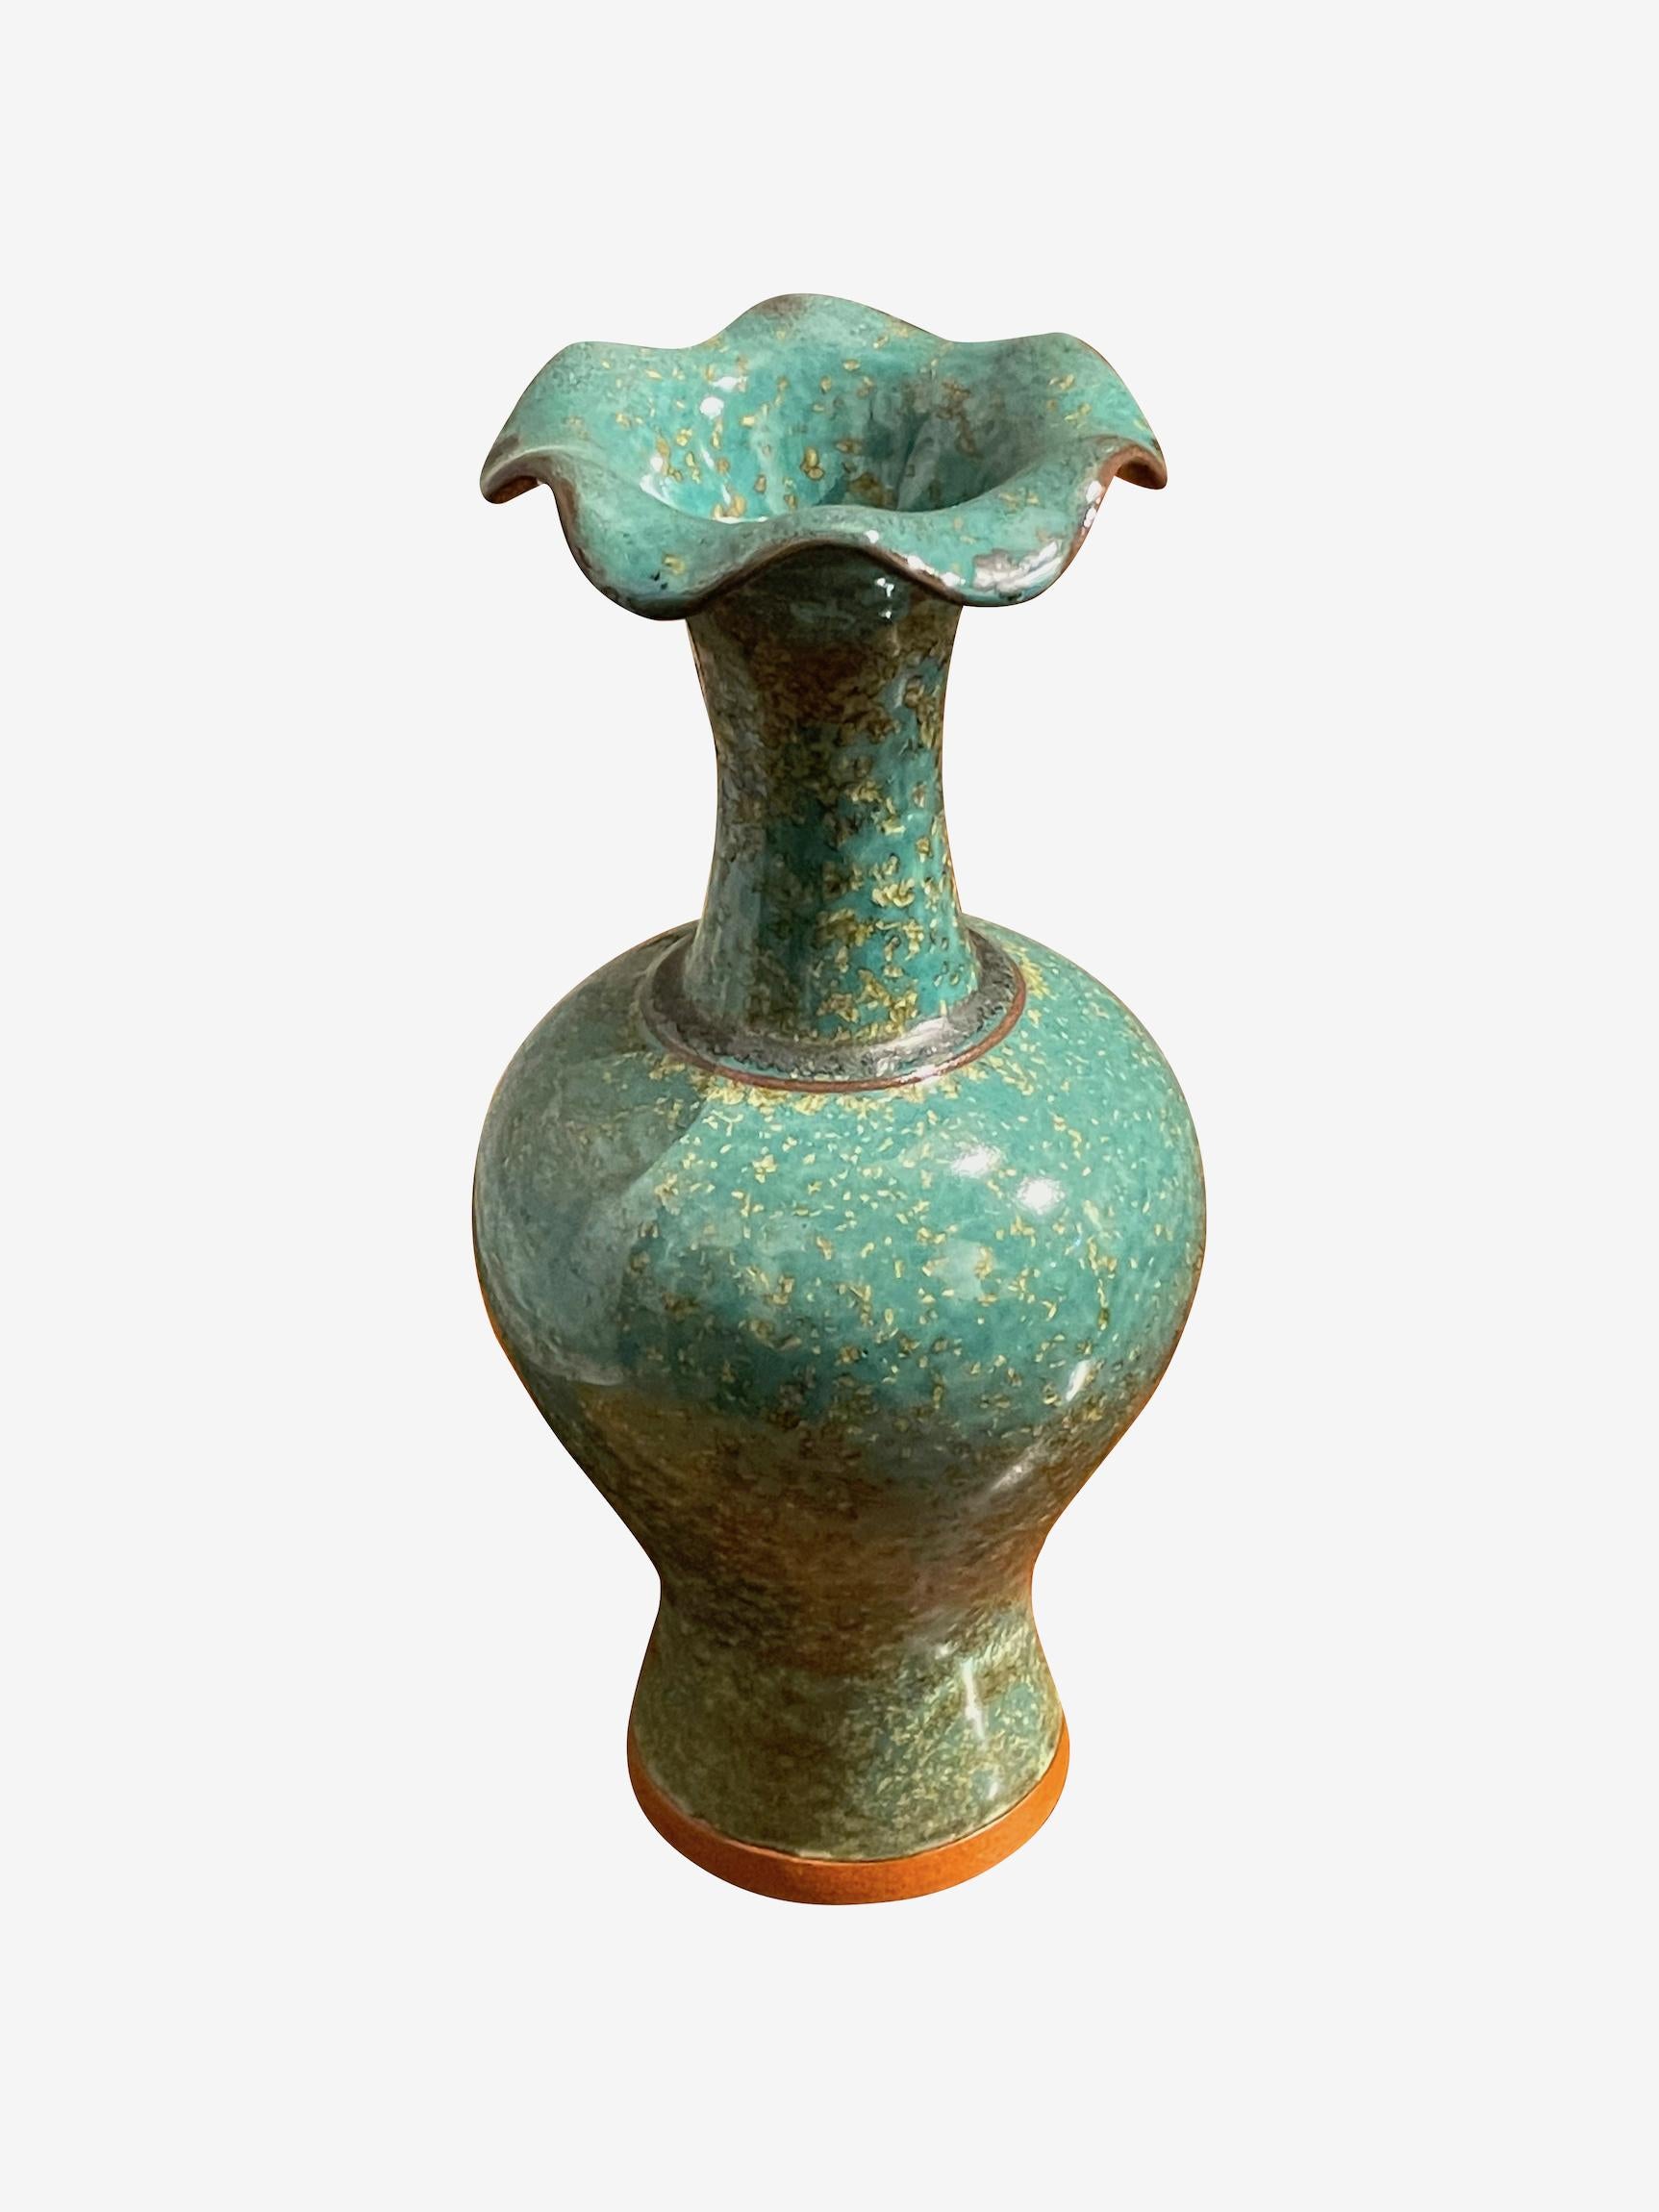 Contemporary Chinese turquoise with gold speckled glaze vase.
Tall classic shape with decorative scalloped spout opening.
One of several pieces from a large collection.
ARRIVING MARCH